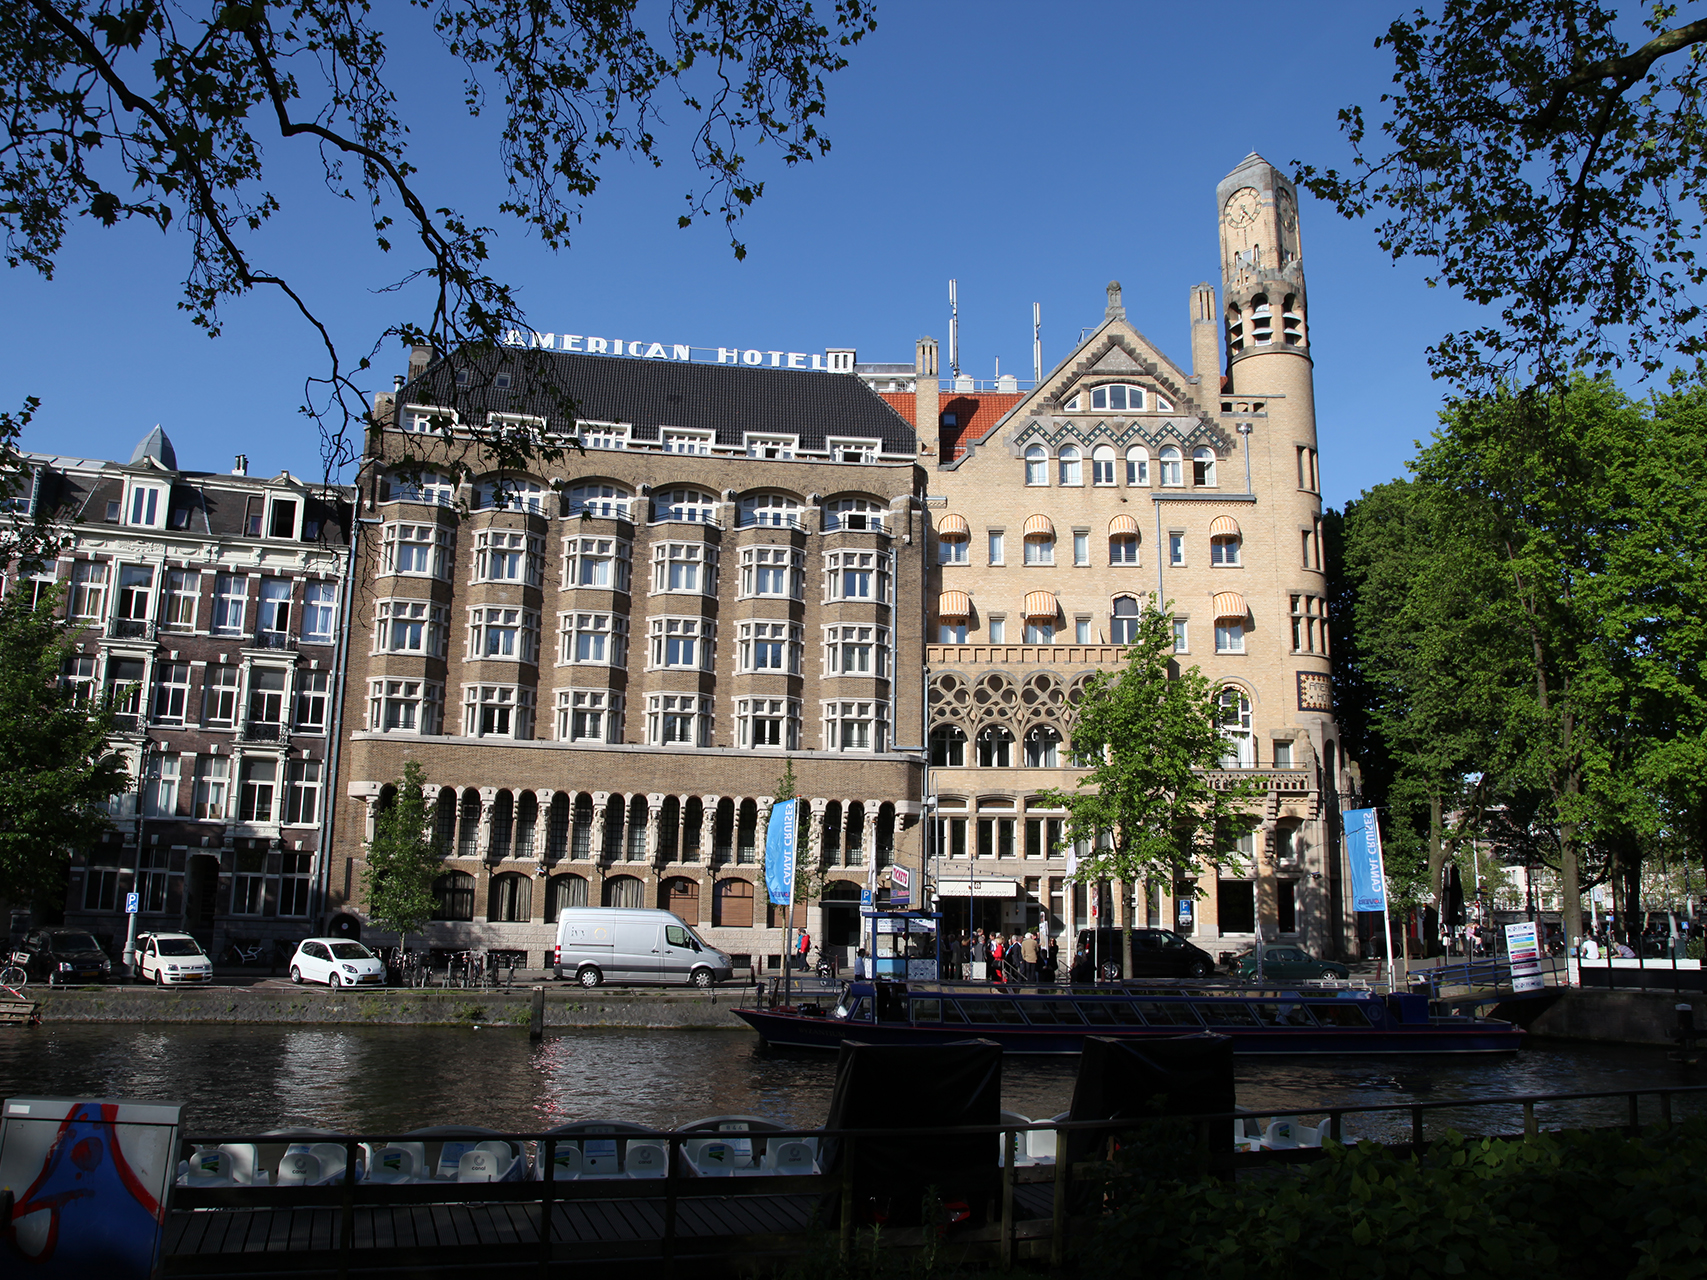 American-Hotel-corona-disinfect-Amsterdam-School-Architecture-canals-1900-miracle